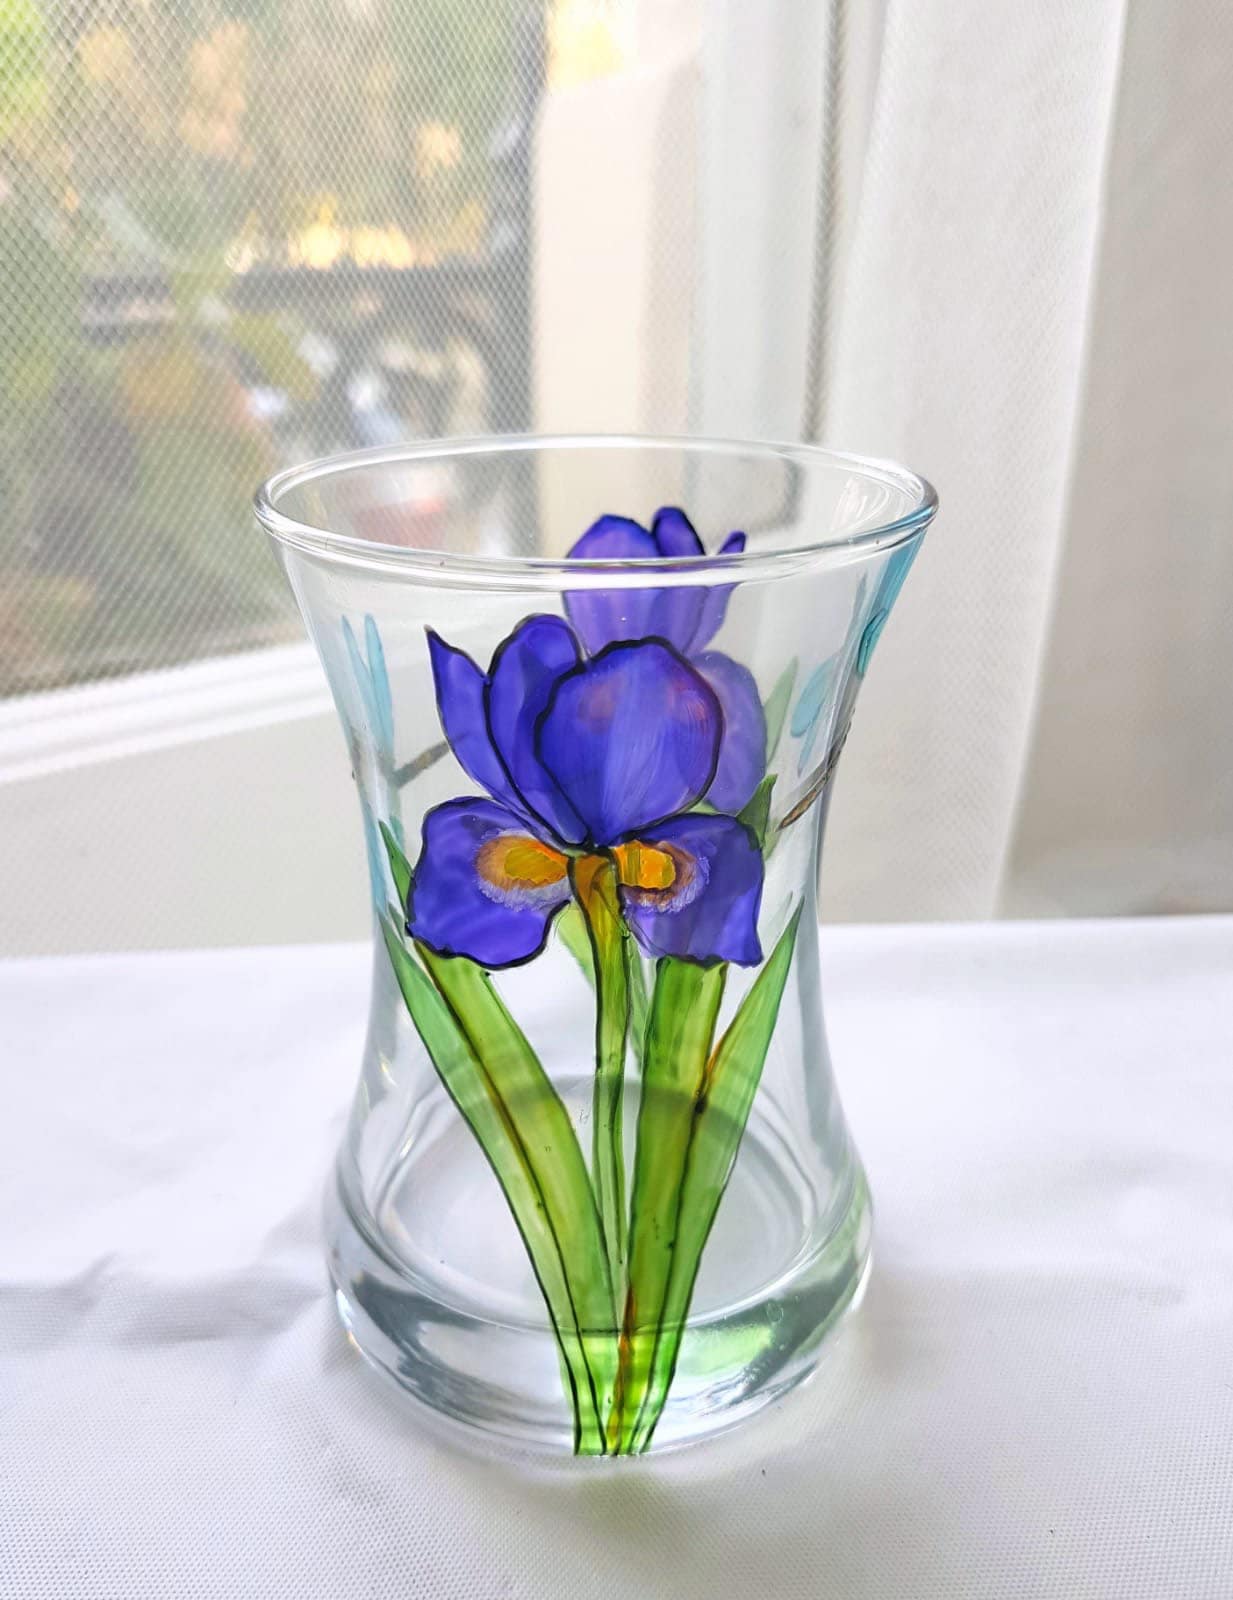 Iris and dragonfly design posey vase